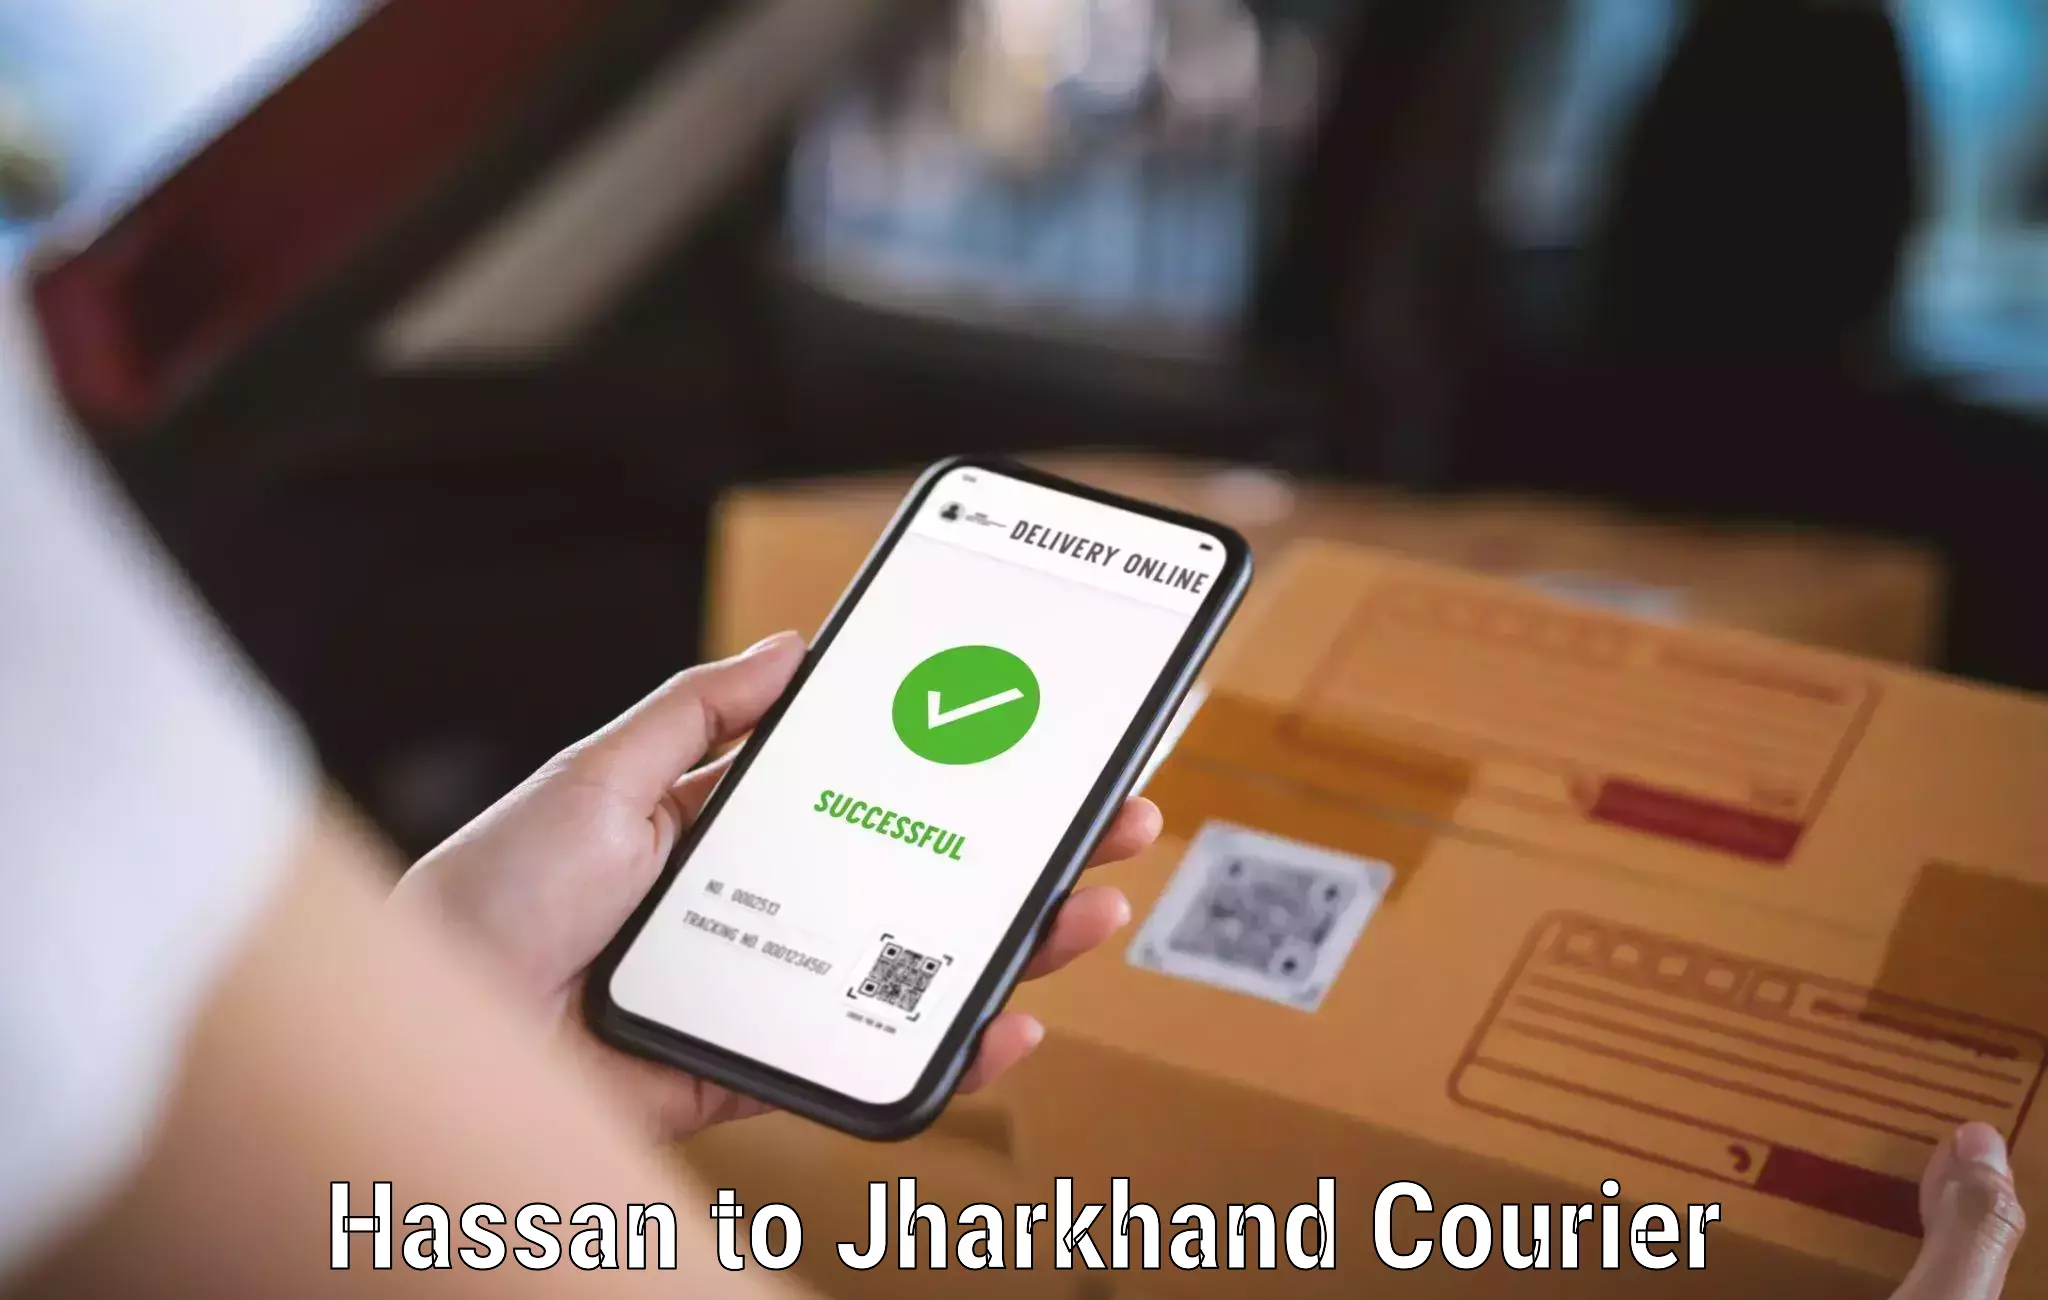 Cash on delivery service Hassan to Kedla